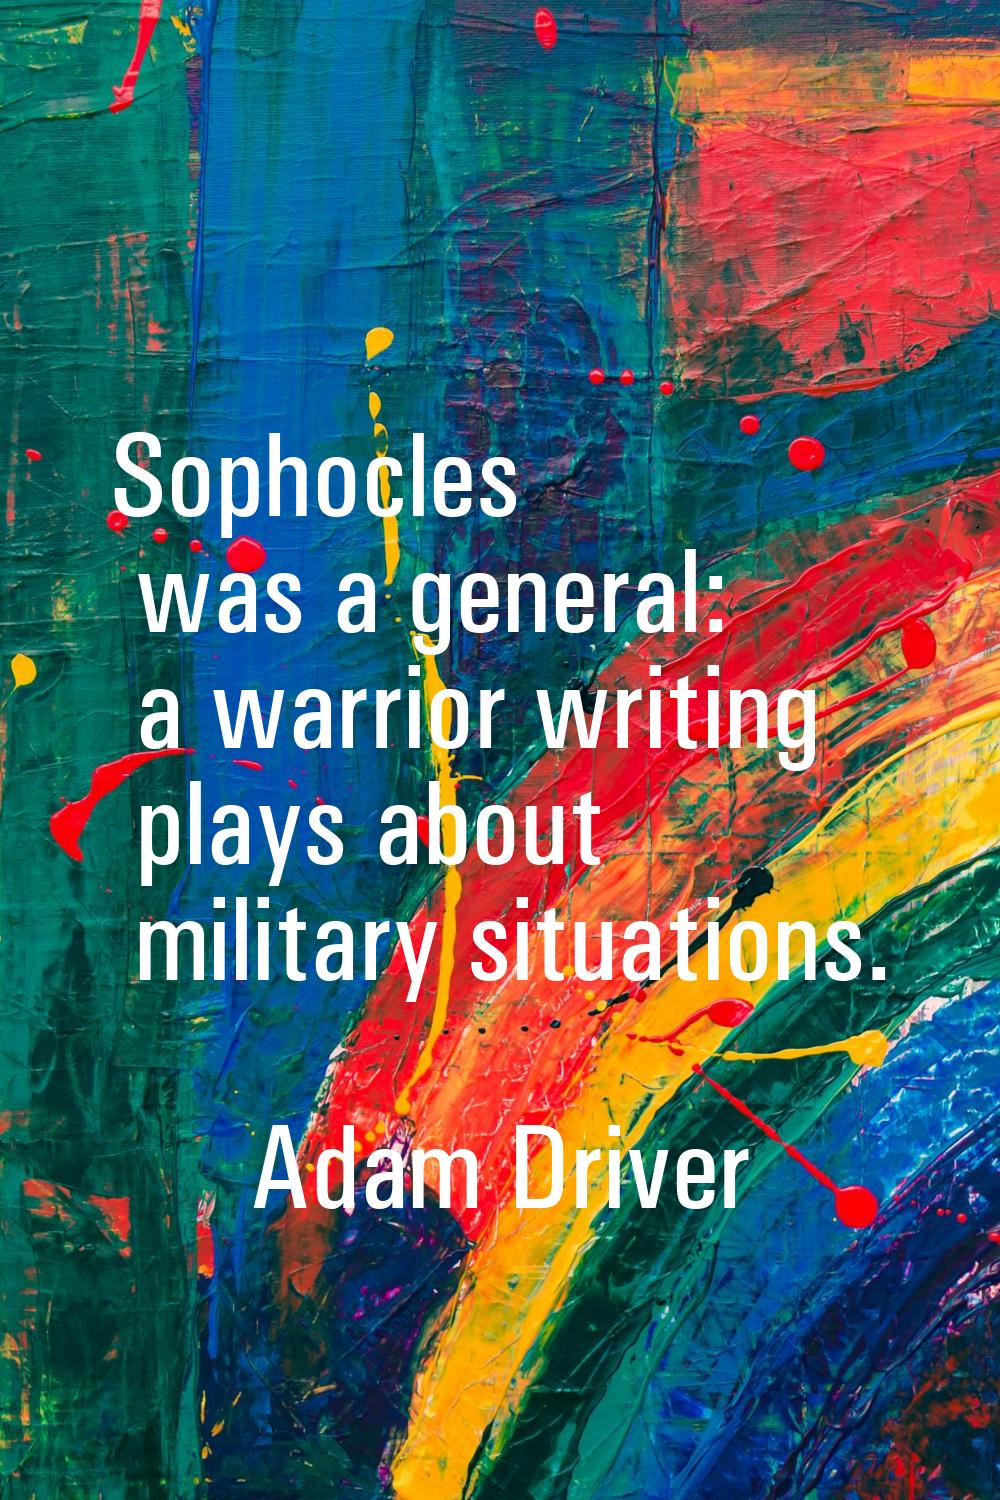 Sophocles was a general: a warrior writing plays about military situations.